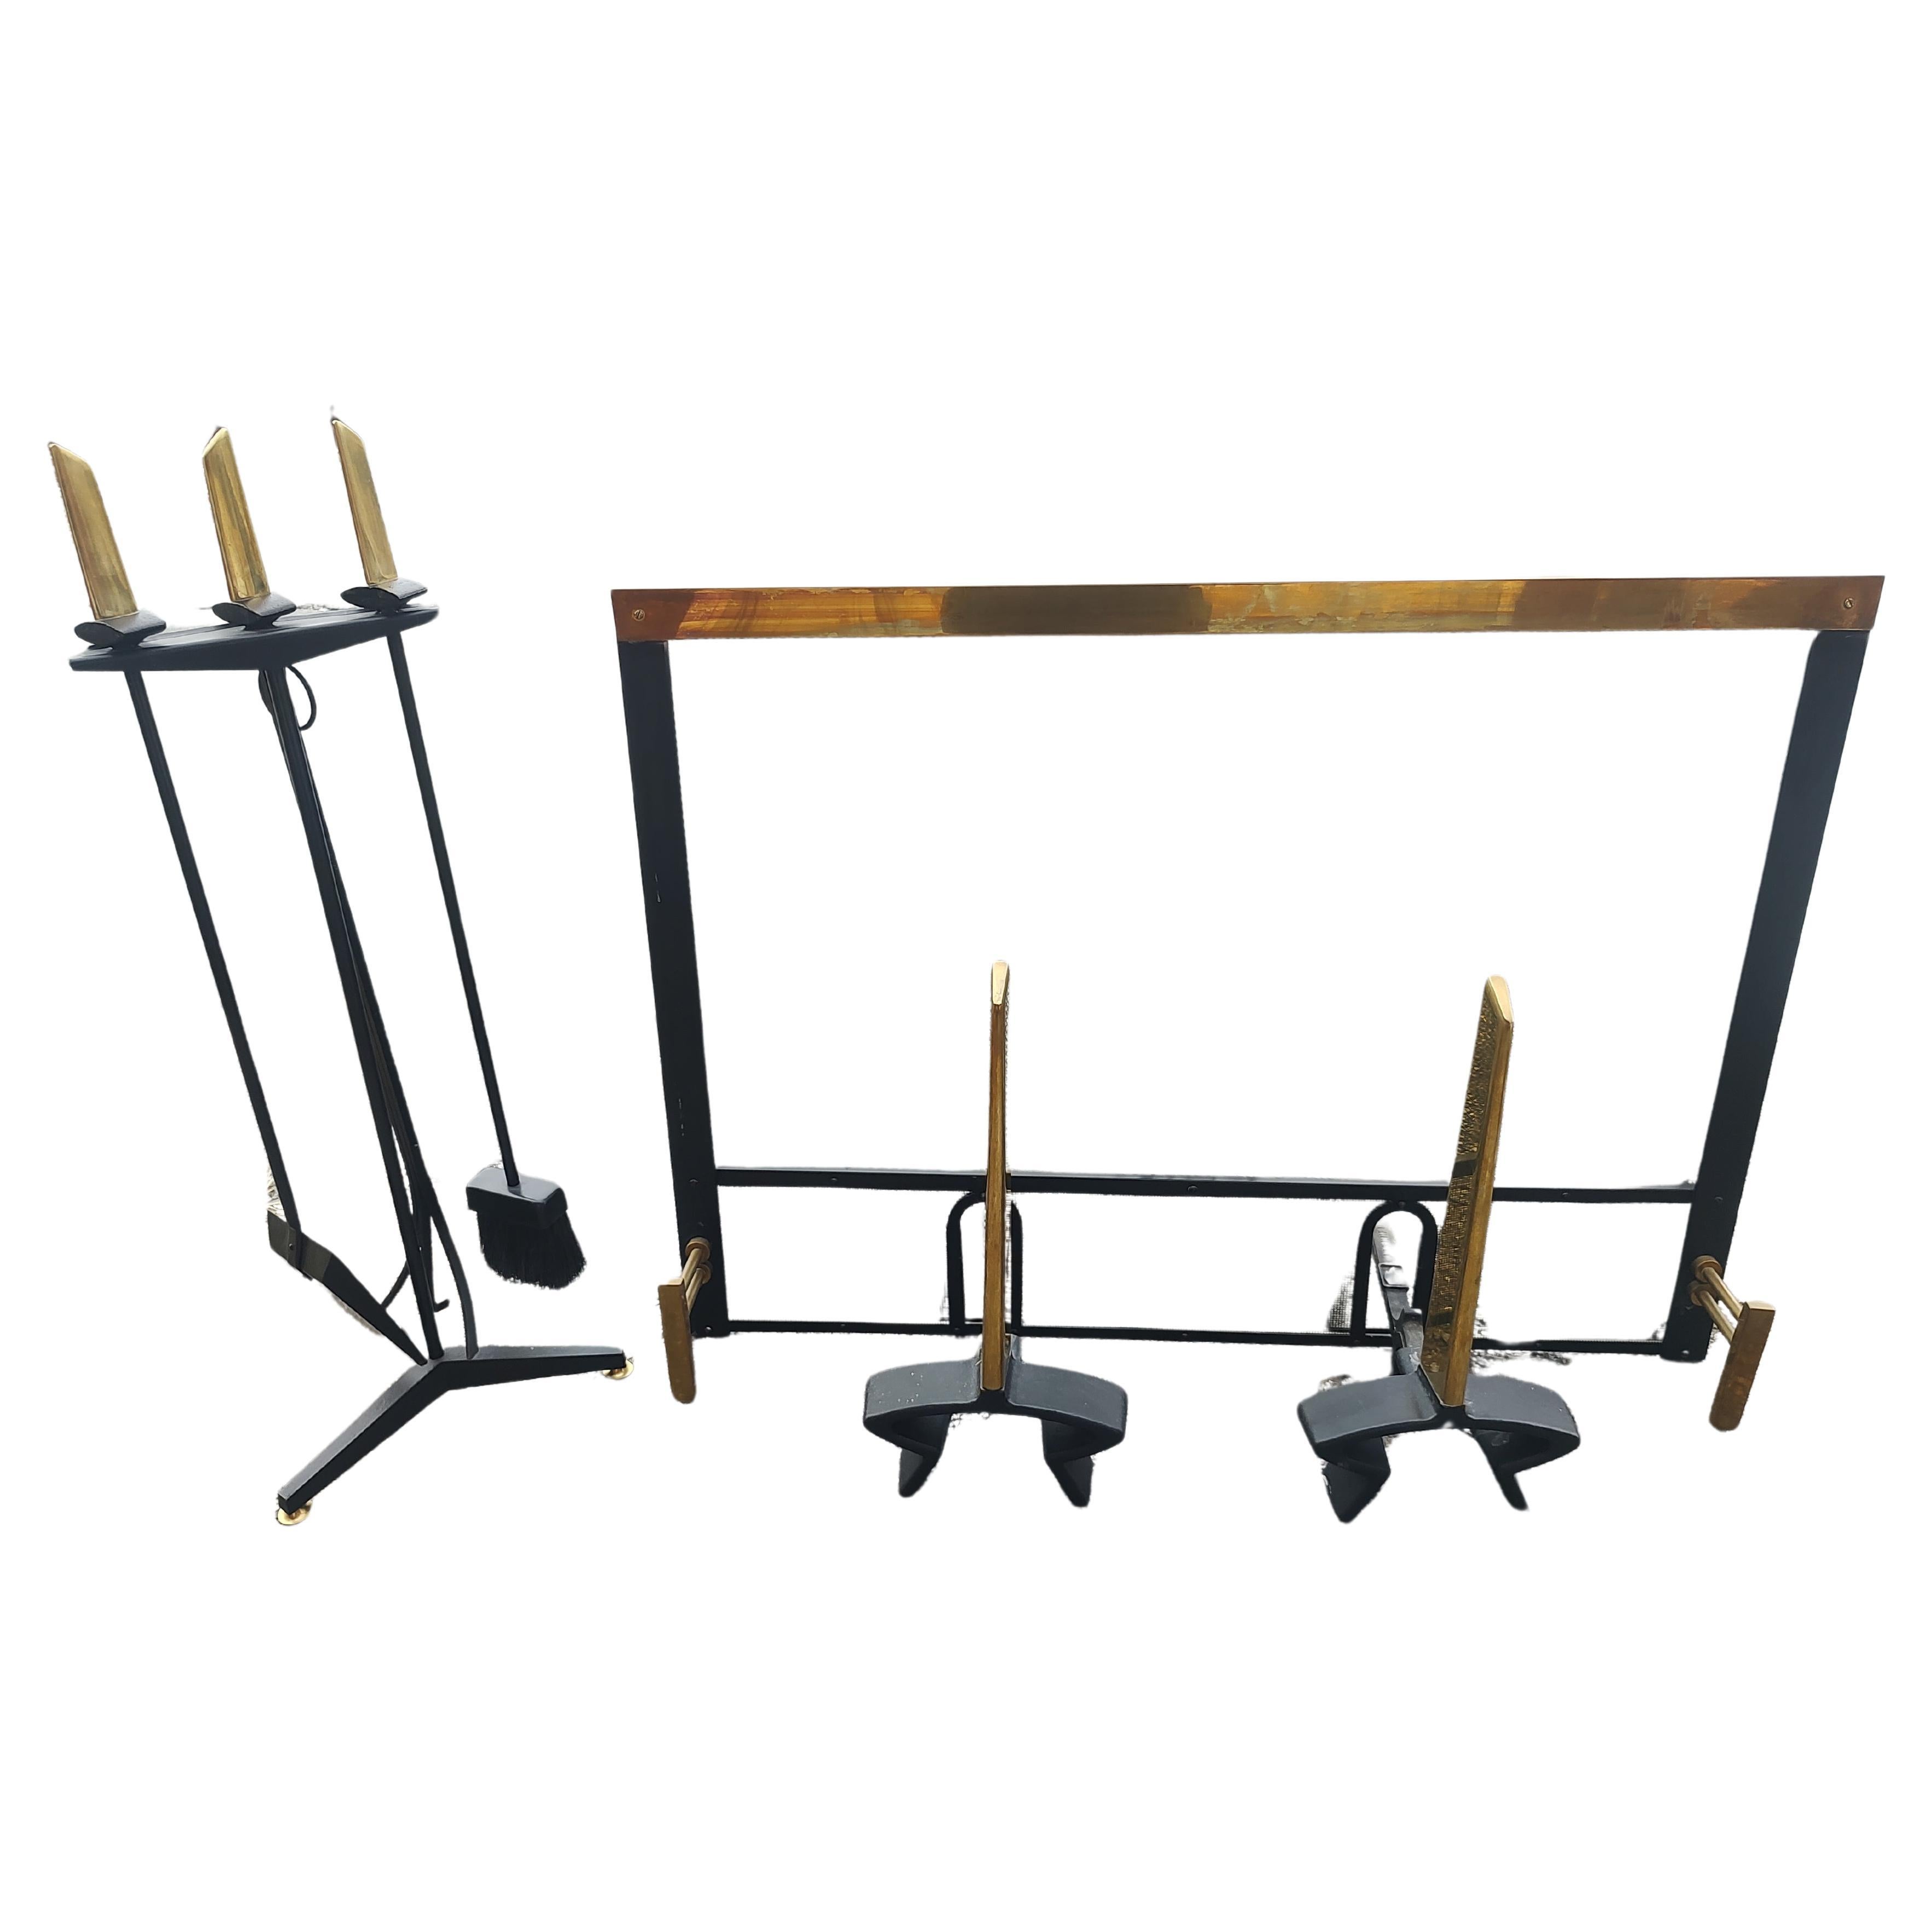 Forged Mid Century Modern 7Pc Set by Donald Deskey Fireplace Screen Tools & Andirons For Sale